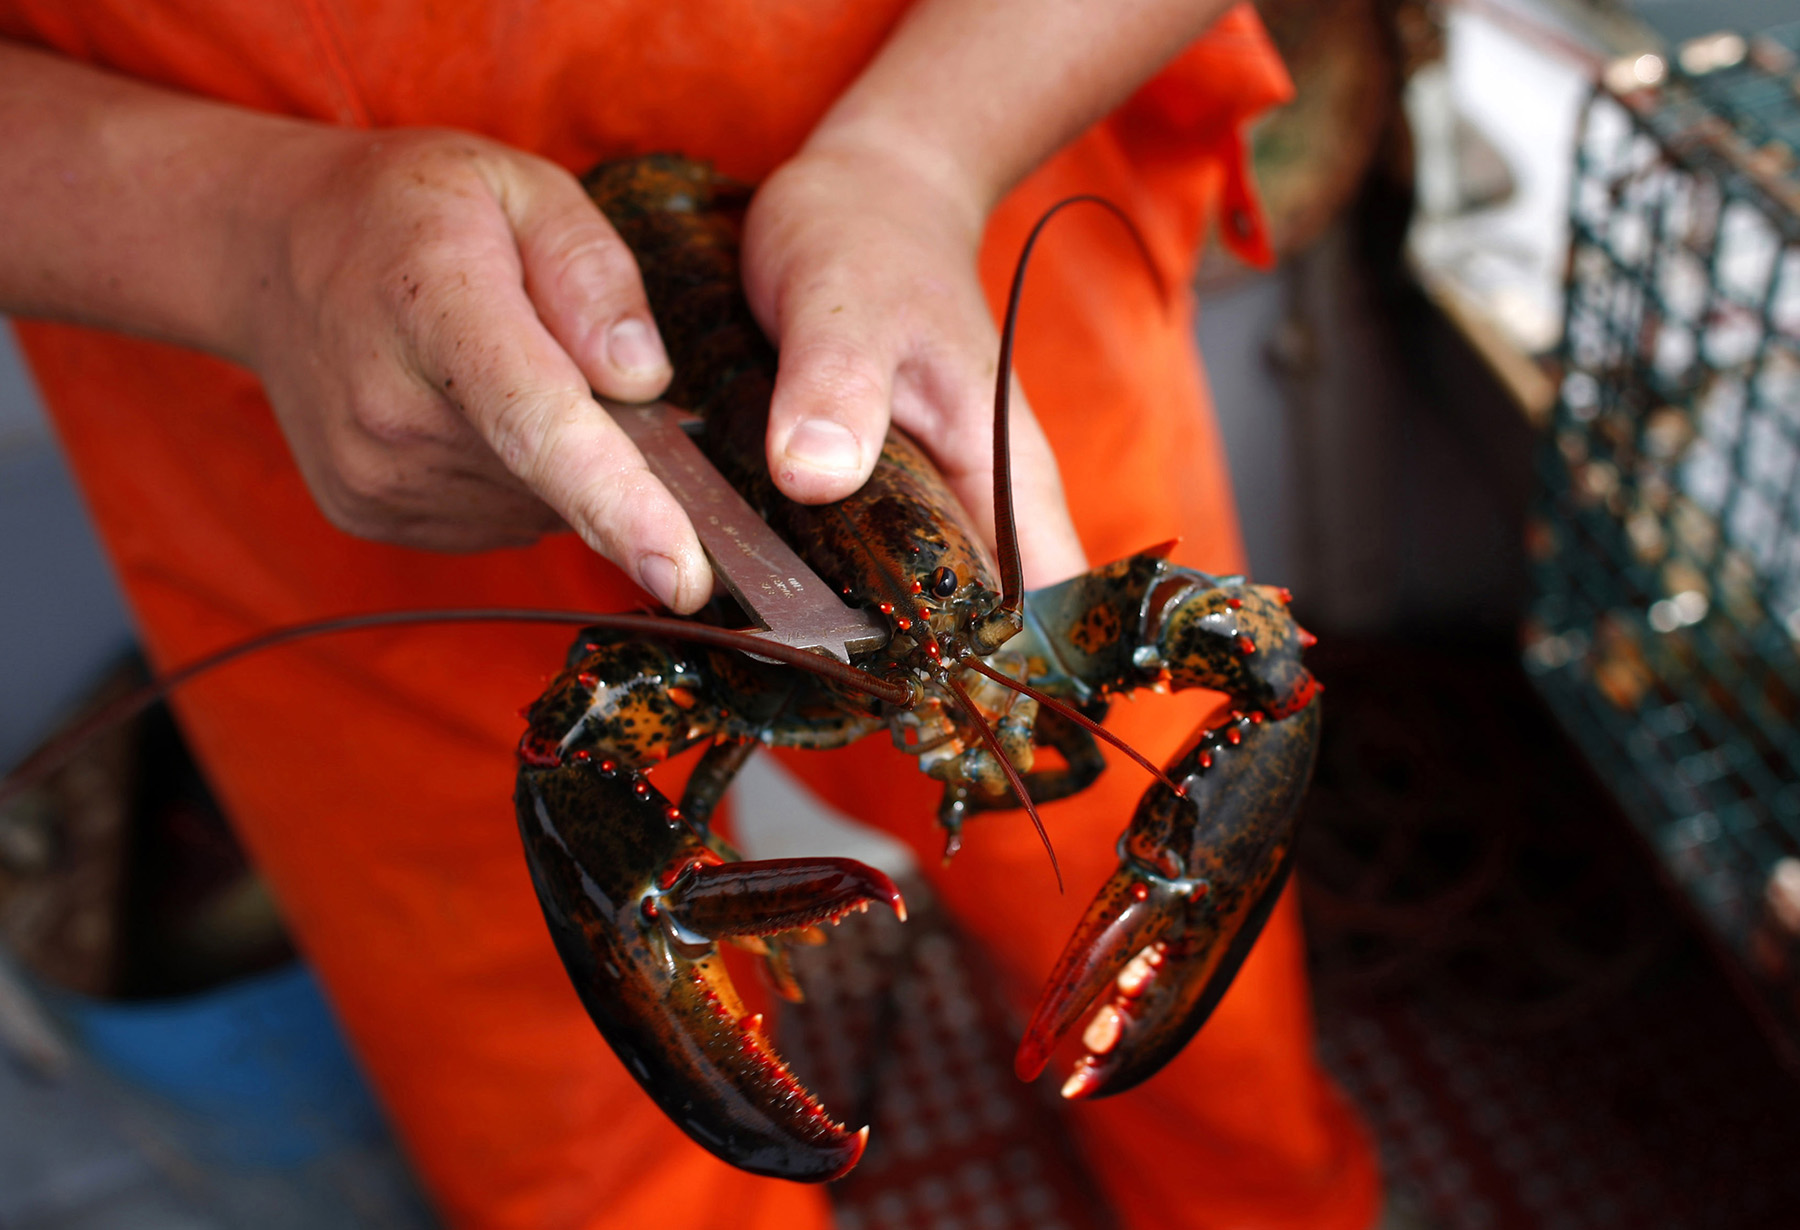 Commercial fisherman Chris Welch measures a lobster to ensure it meets size requirements in Kennebunkport, Maine